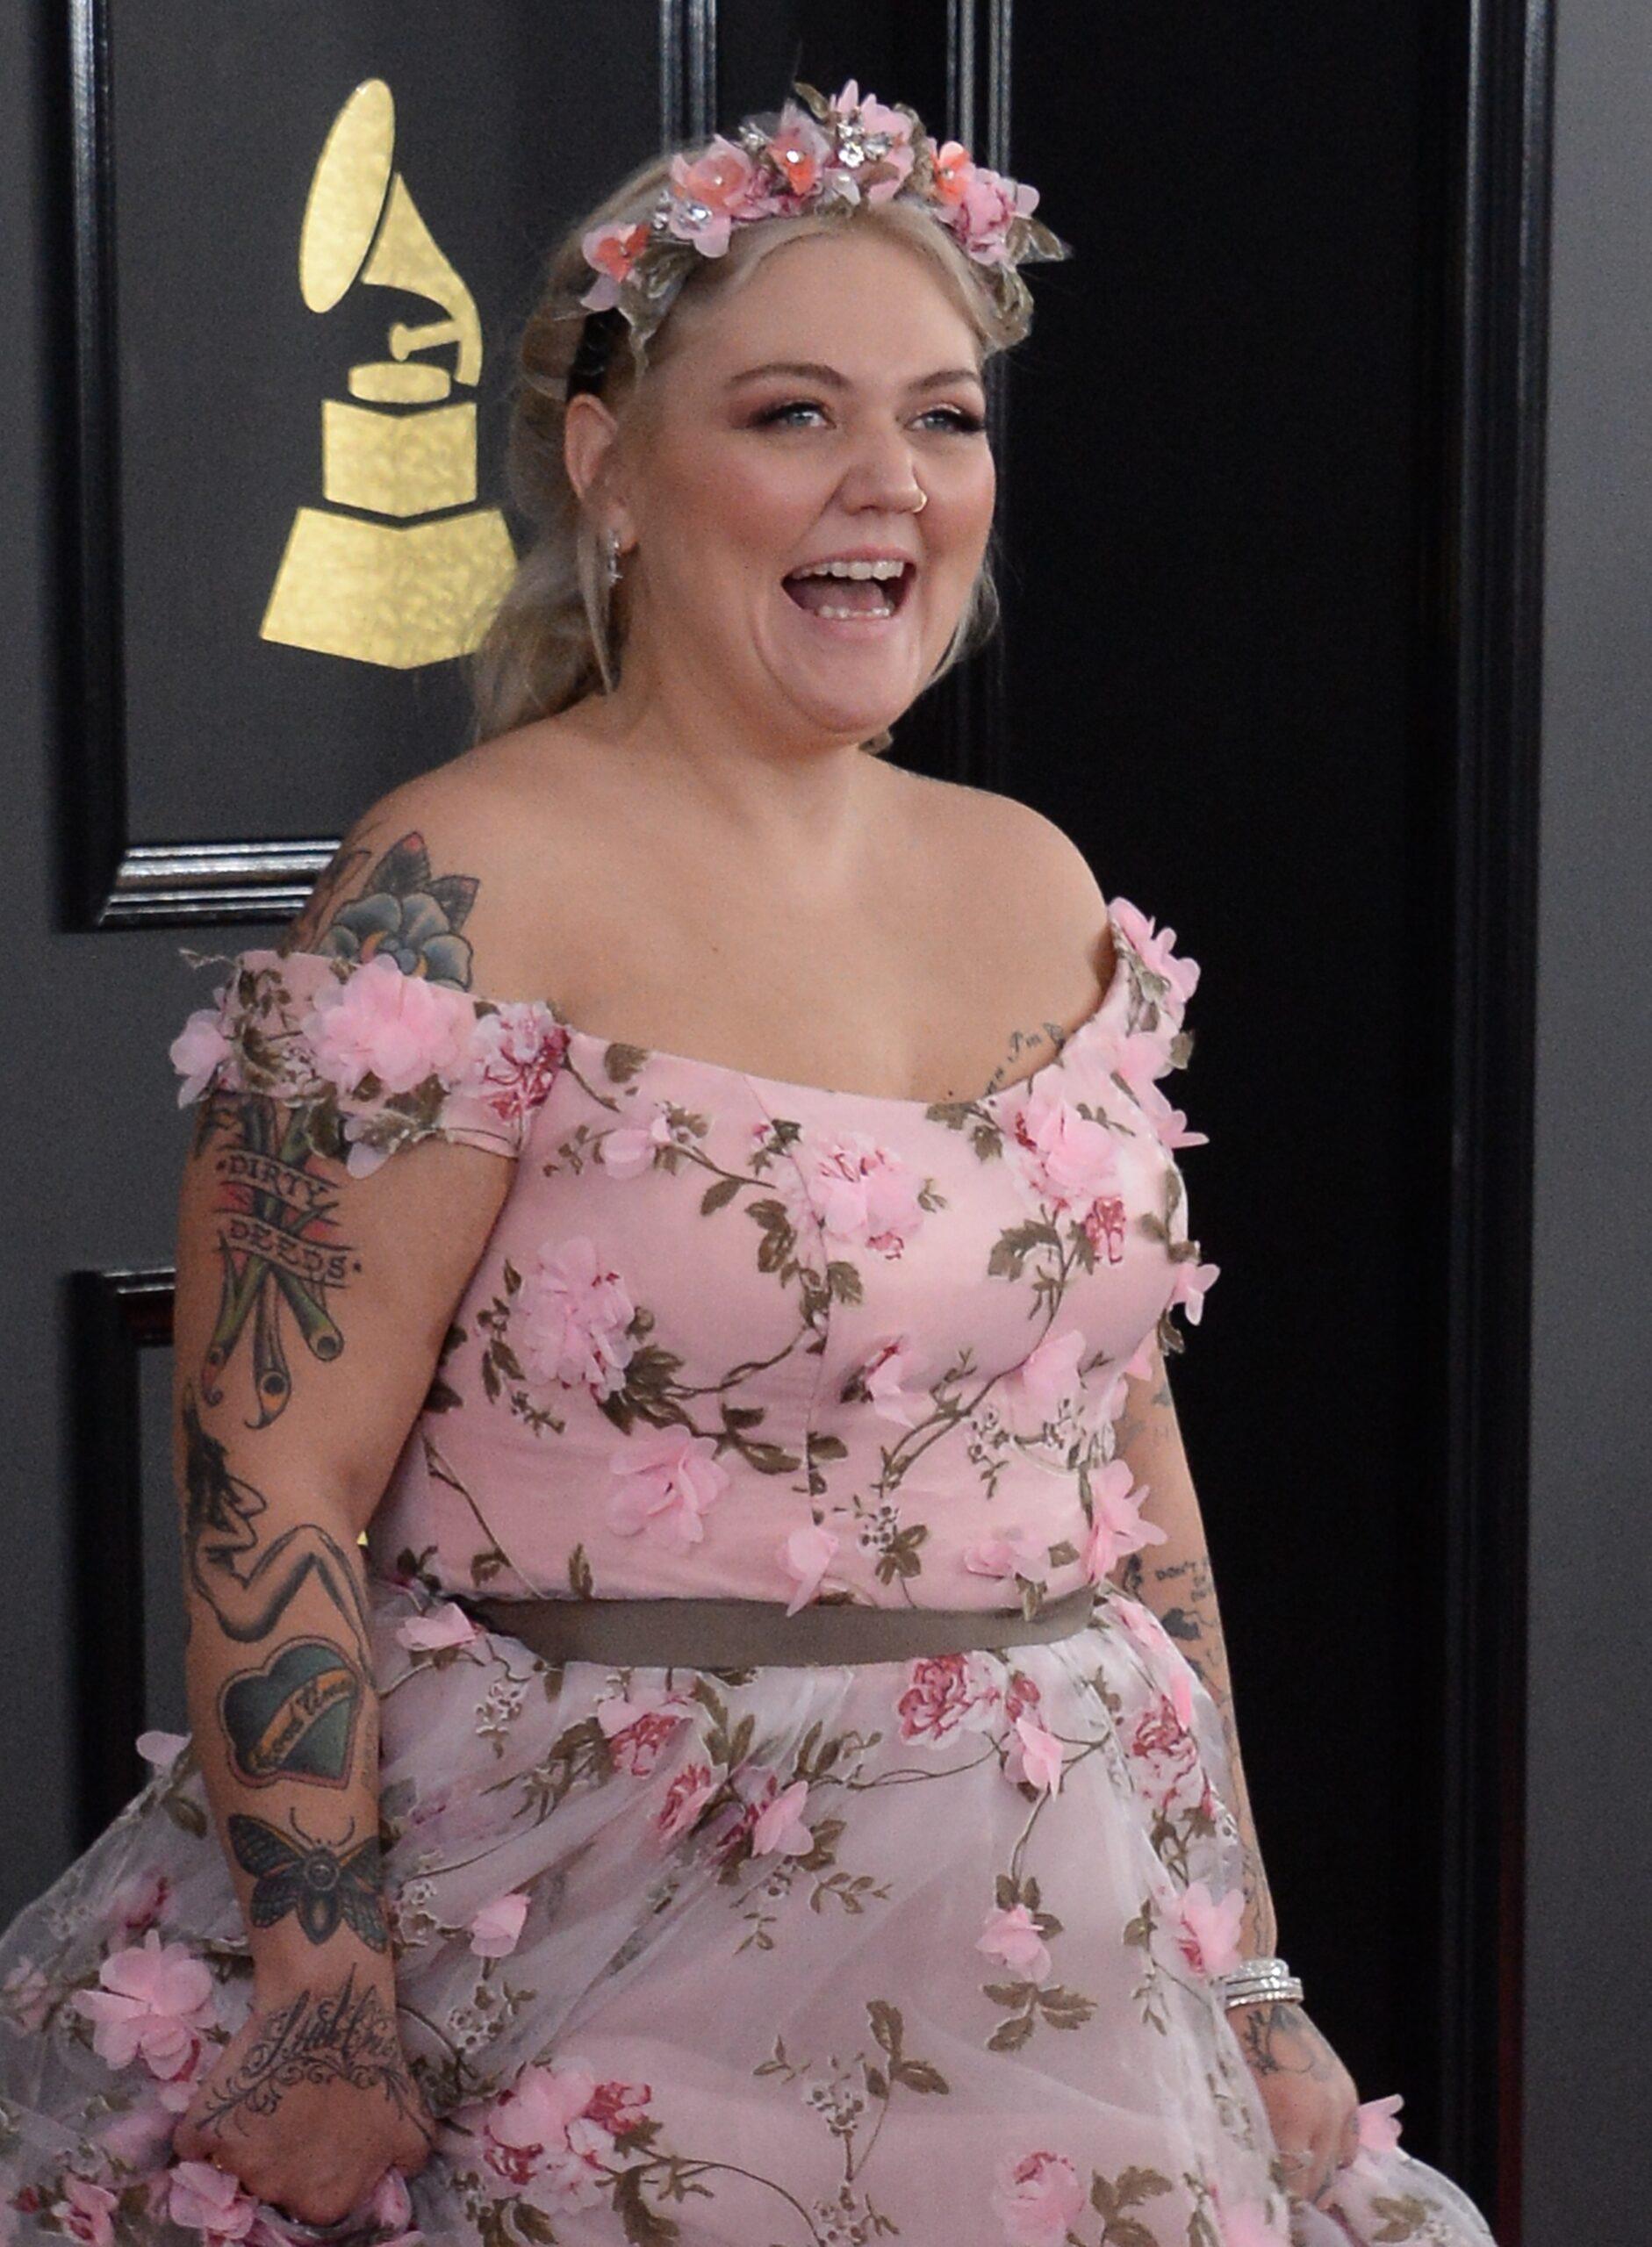 Elle King arrives for the 59th annual Grammy Awards in Los Angeles